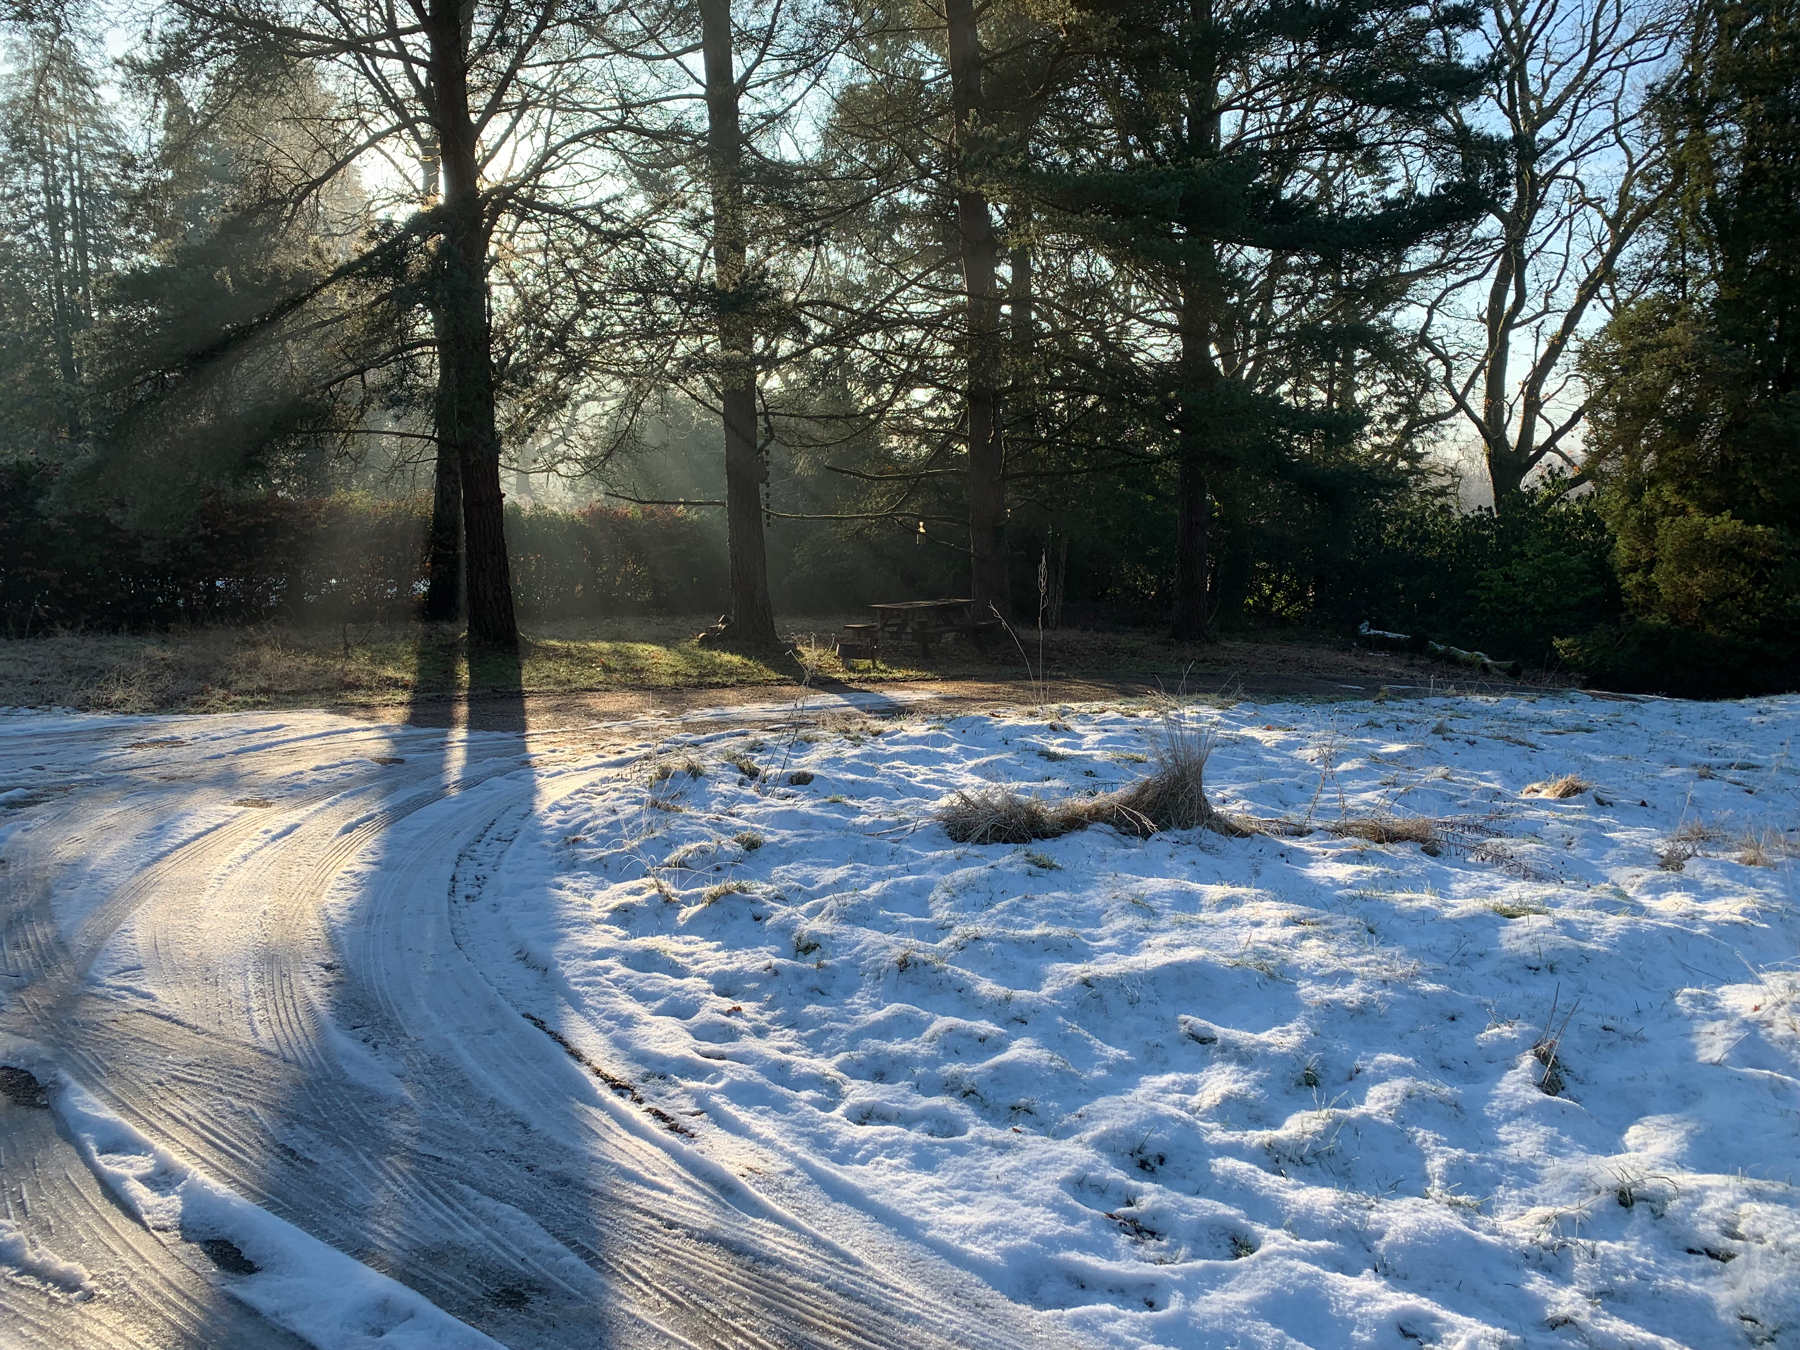 Snow covered grass and driveway. Sun streaming through pine trees in the background.